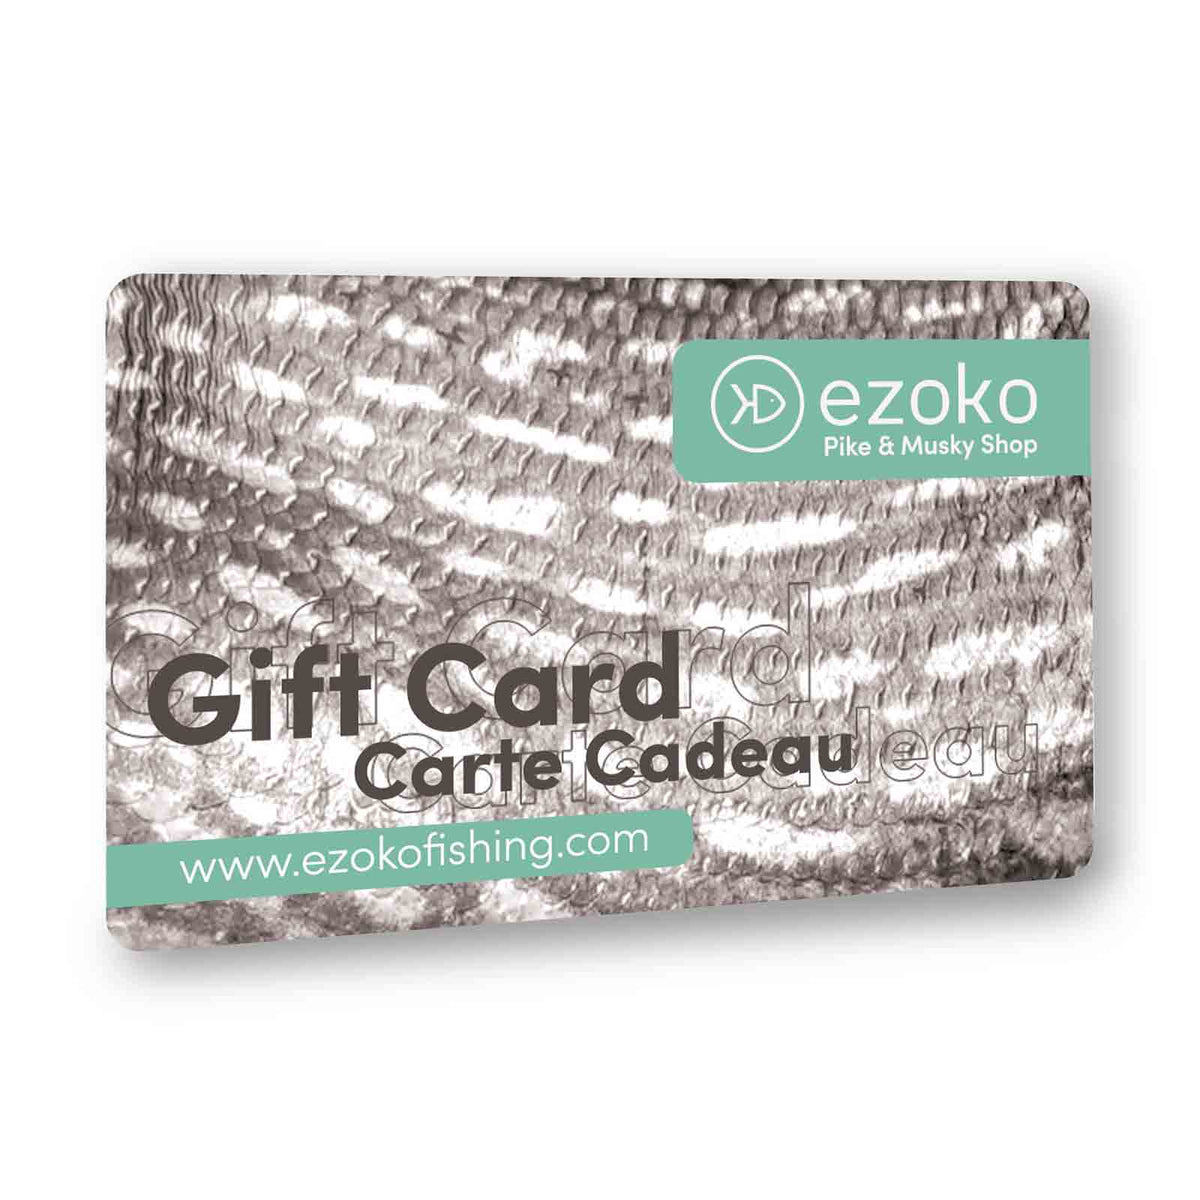 View of Gift_Cards EZOKO Physical Gift Card available at EZOKO Pike and Musky Shop